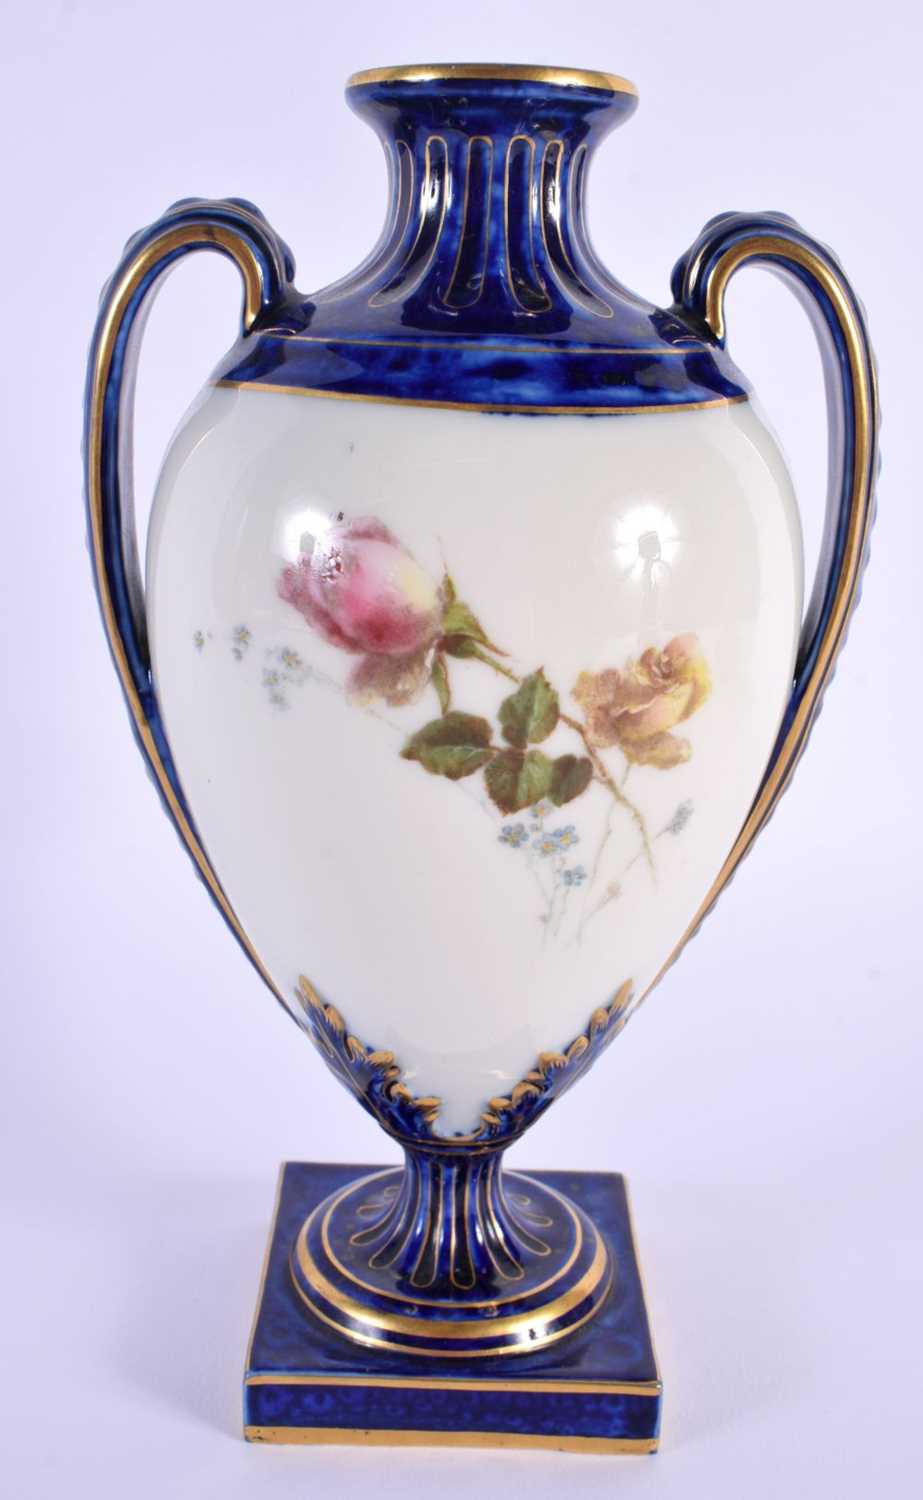 A 19TH CENTURY ROYAL WORCESTER TWIN HANDLED VASE painted with flowers. 18 cm x 10 cm. - Image 4 of 6